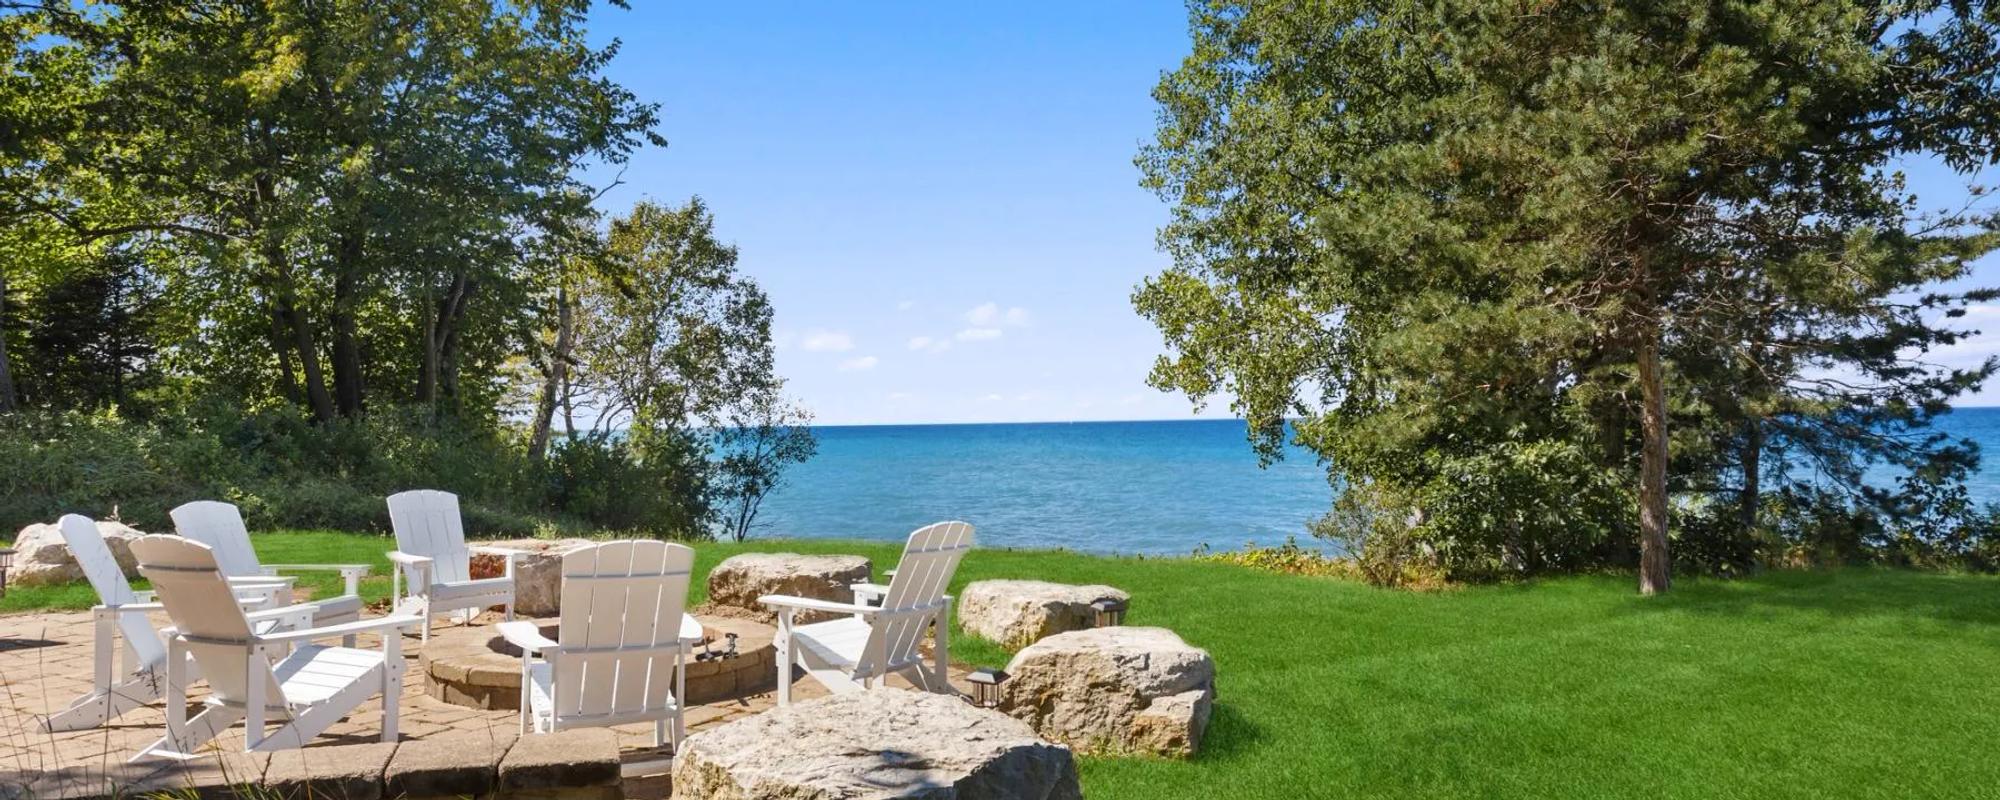 Embrace the Charm of Southwest Michigan's Lakeshore Towns